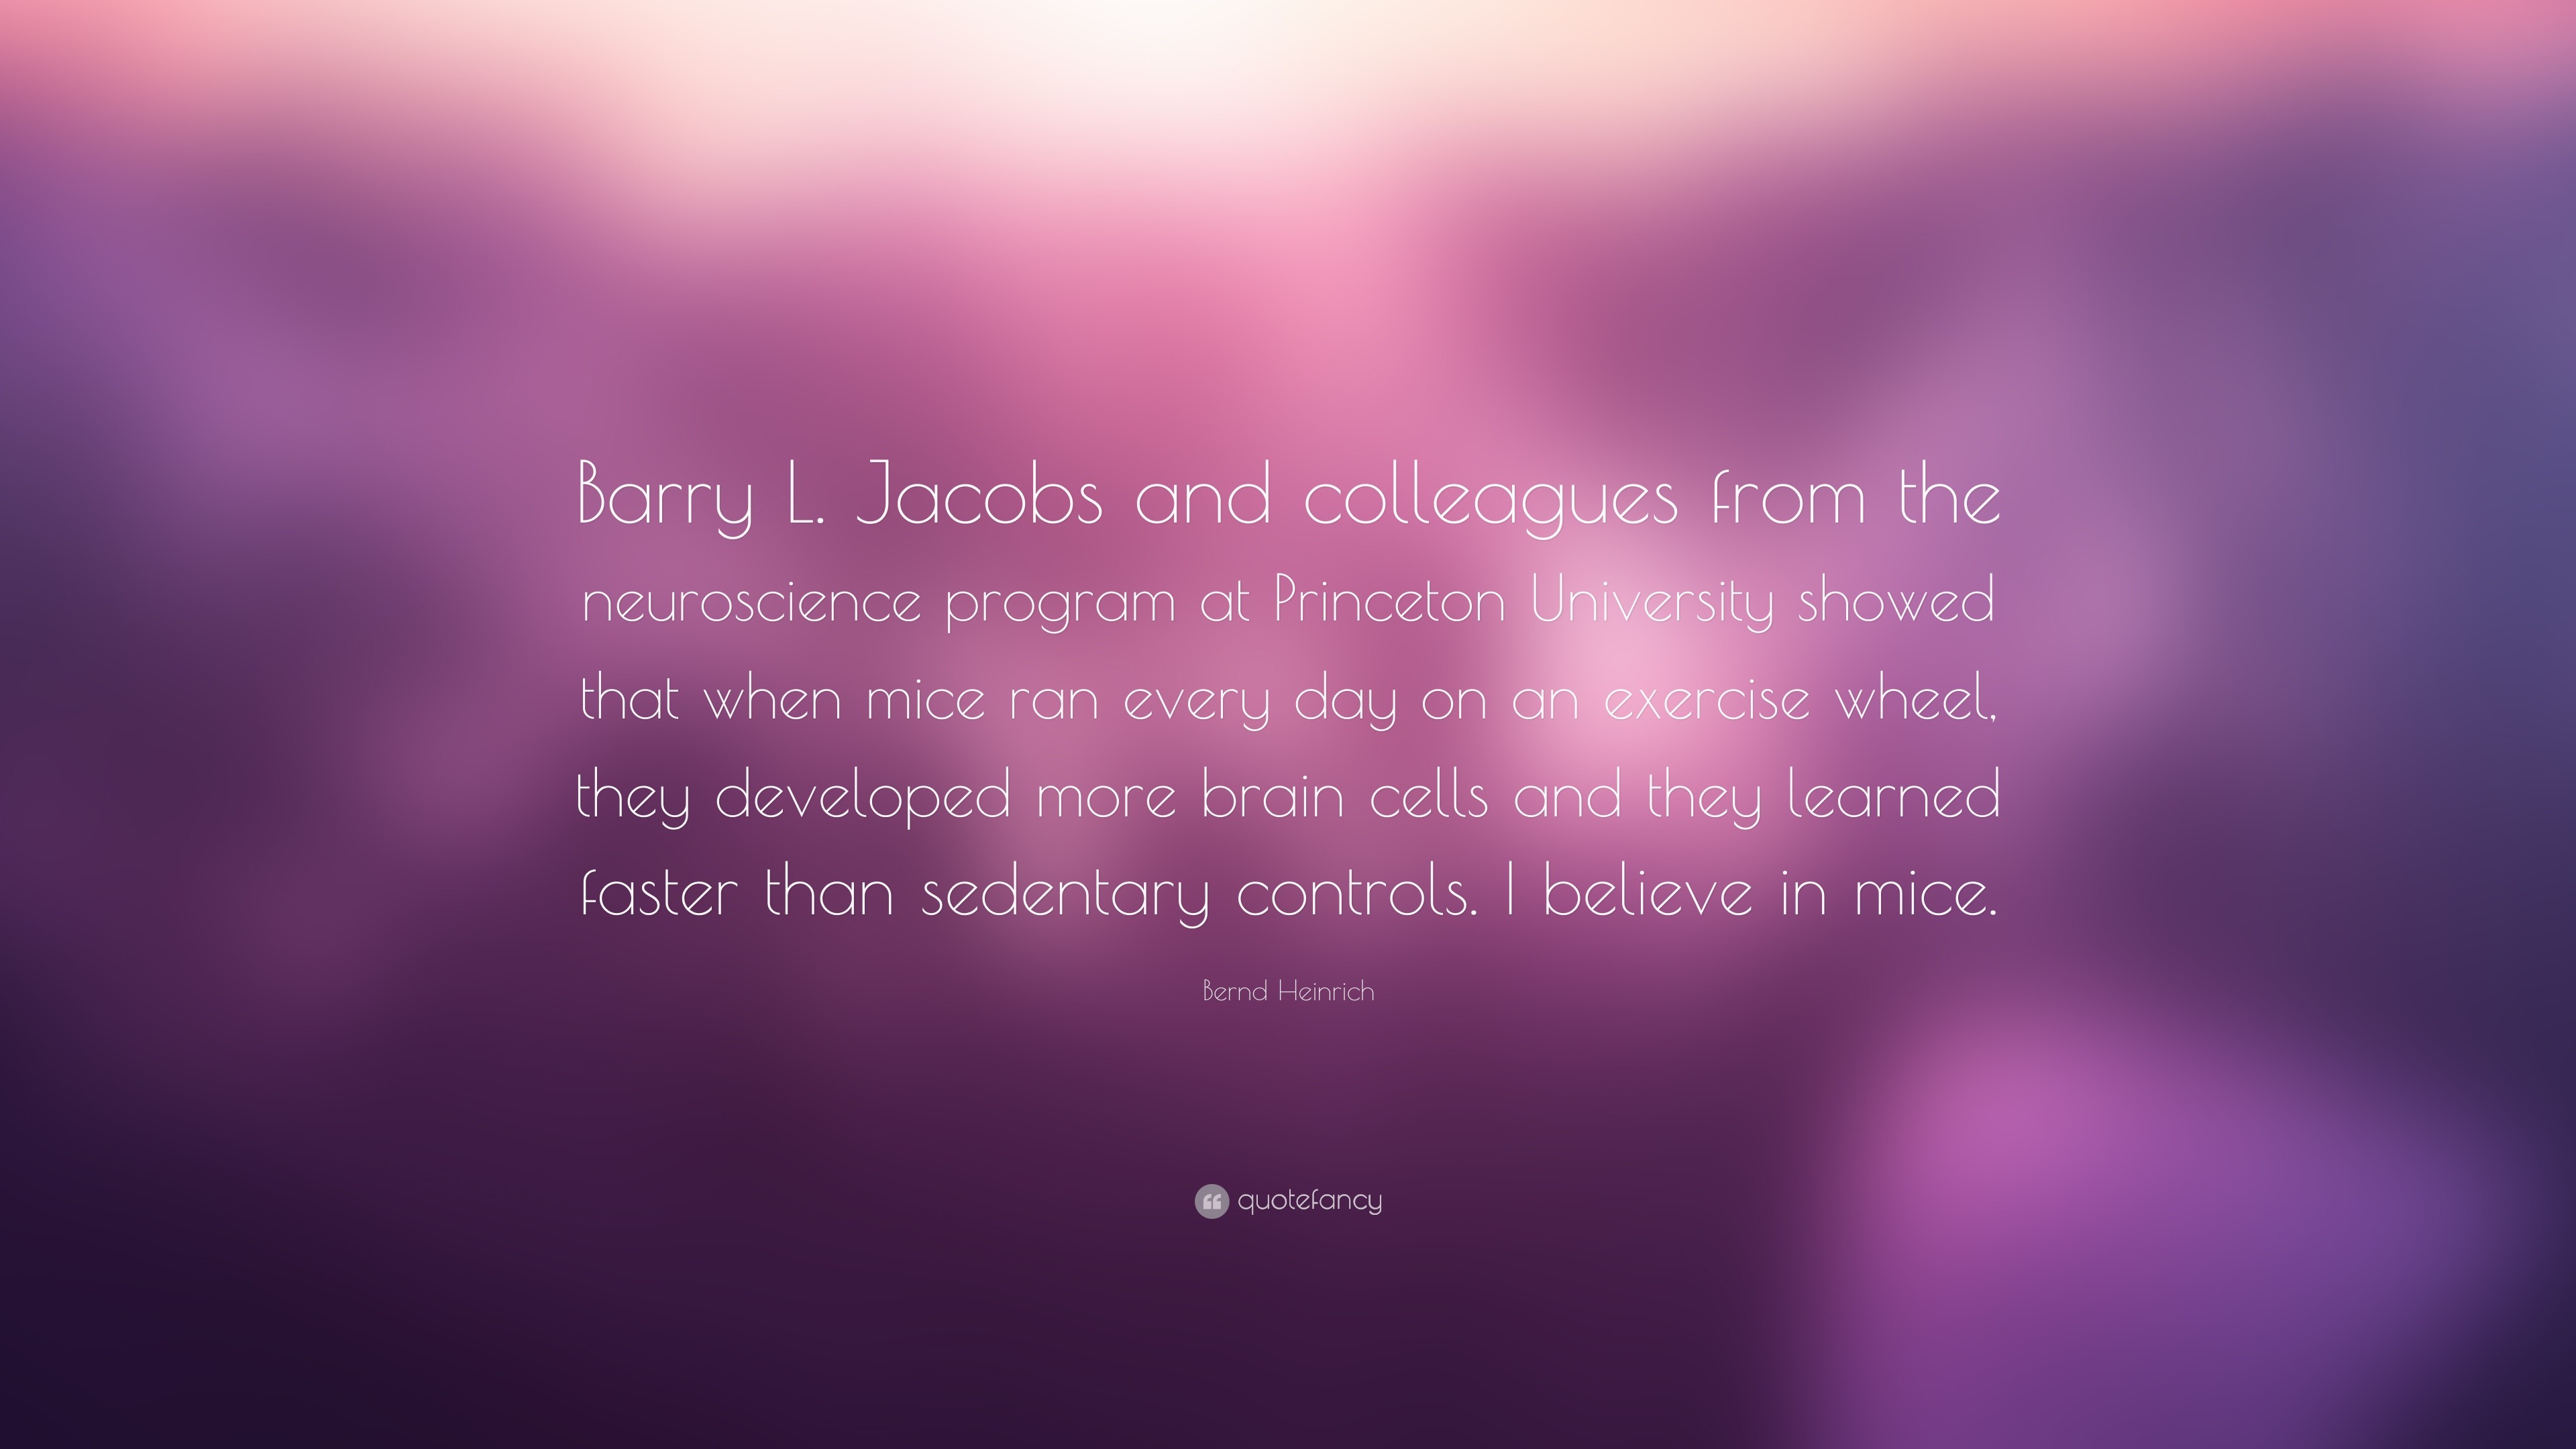 3840x2160 Bernd Heinrich Quote: “Barry L. Jacobs and colleagues from the neuroscience  program at